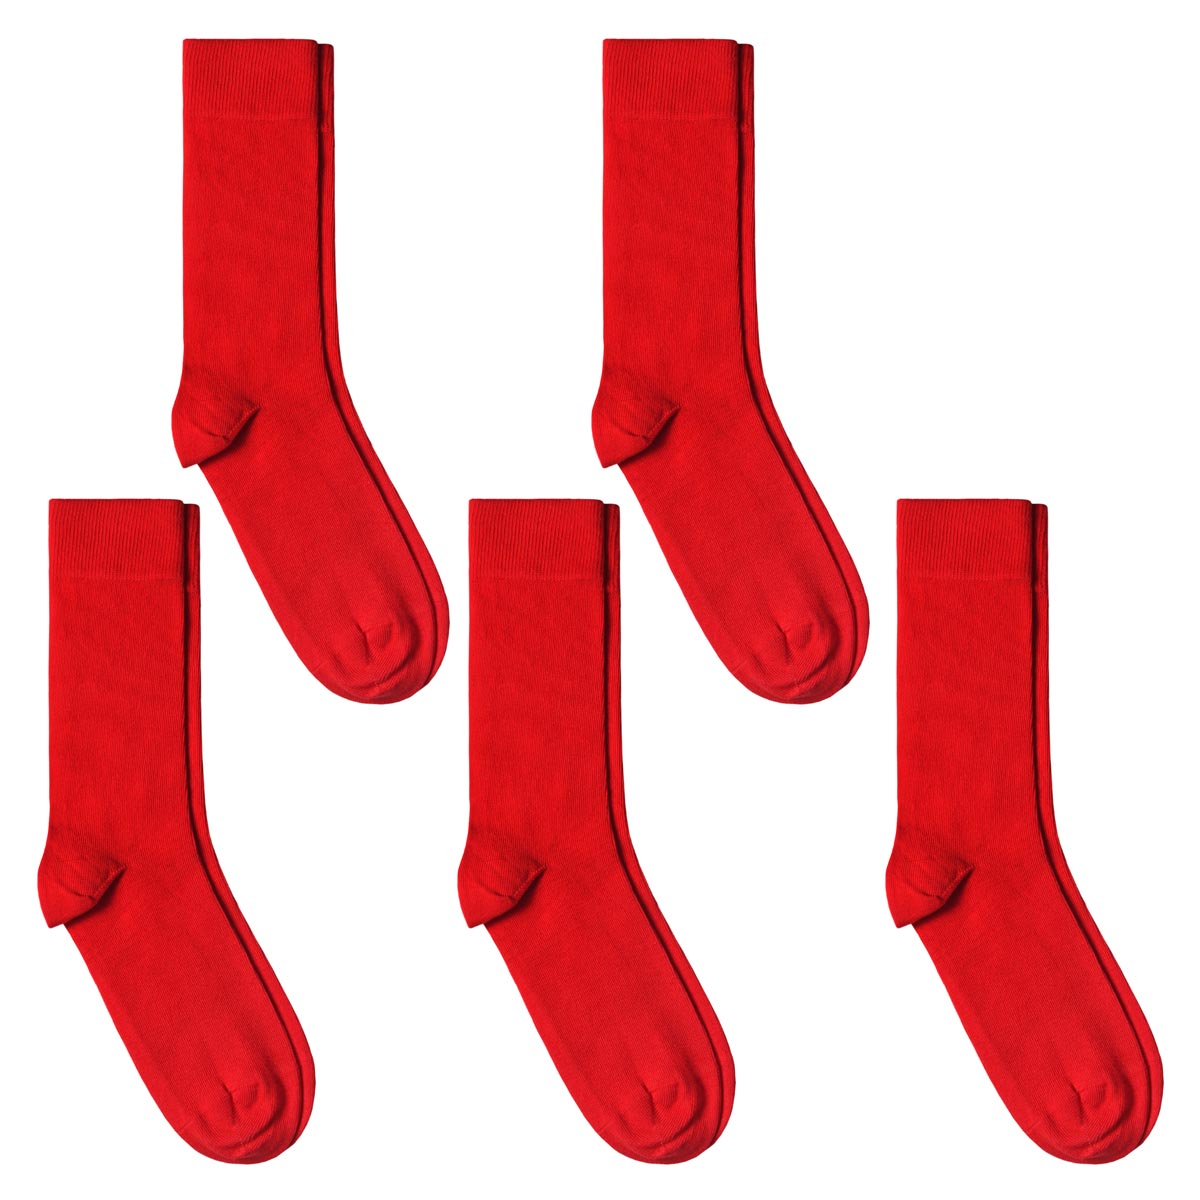 Chaussettes Thin 3 paires Rouge Pointure 43-46 Adulte Homme